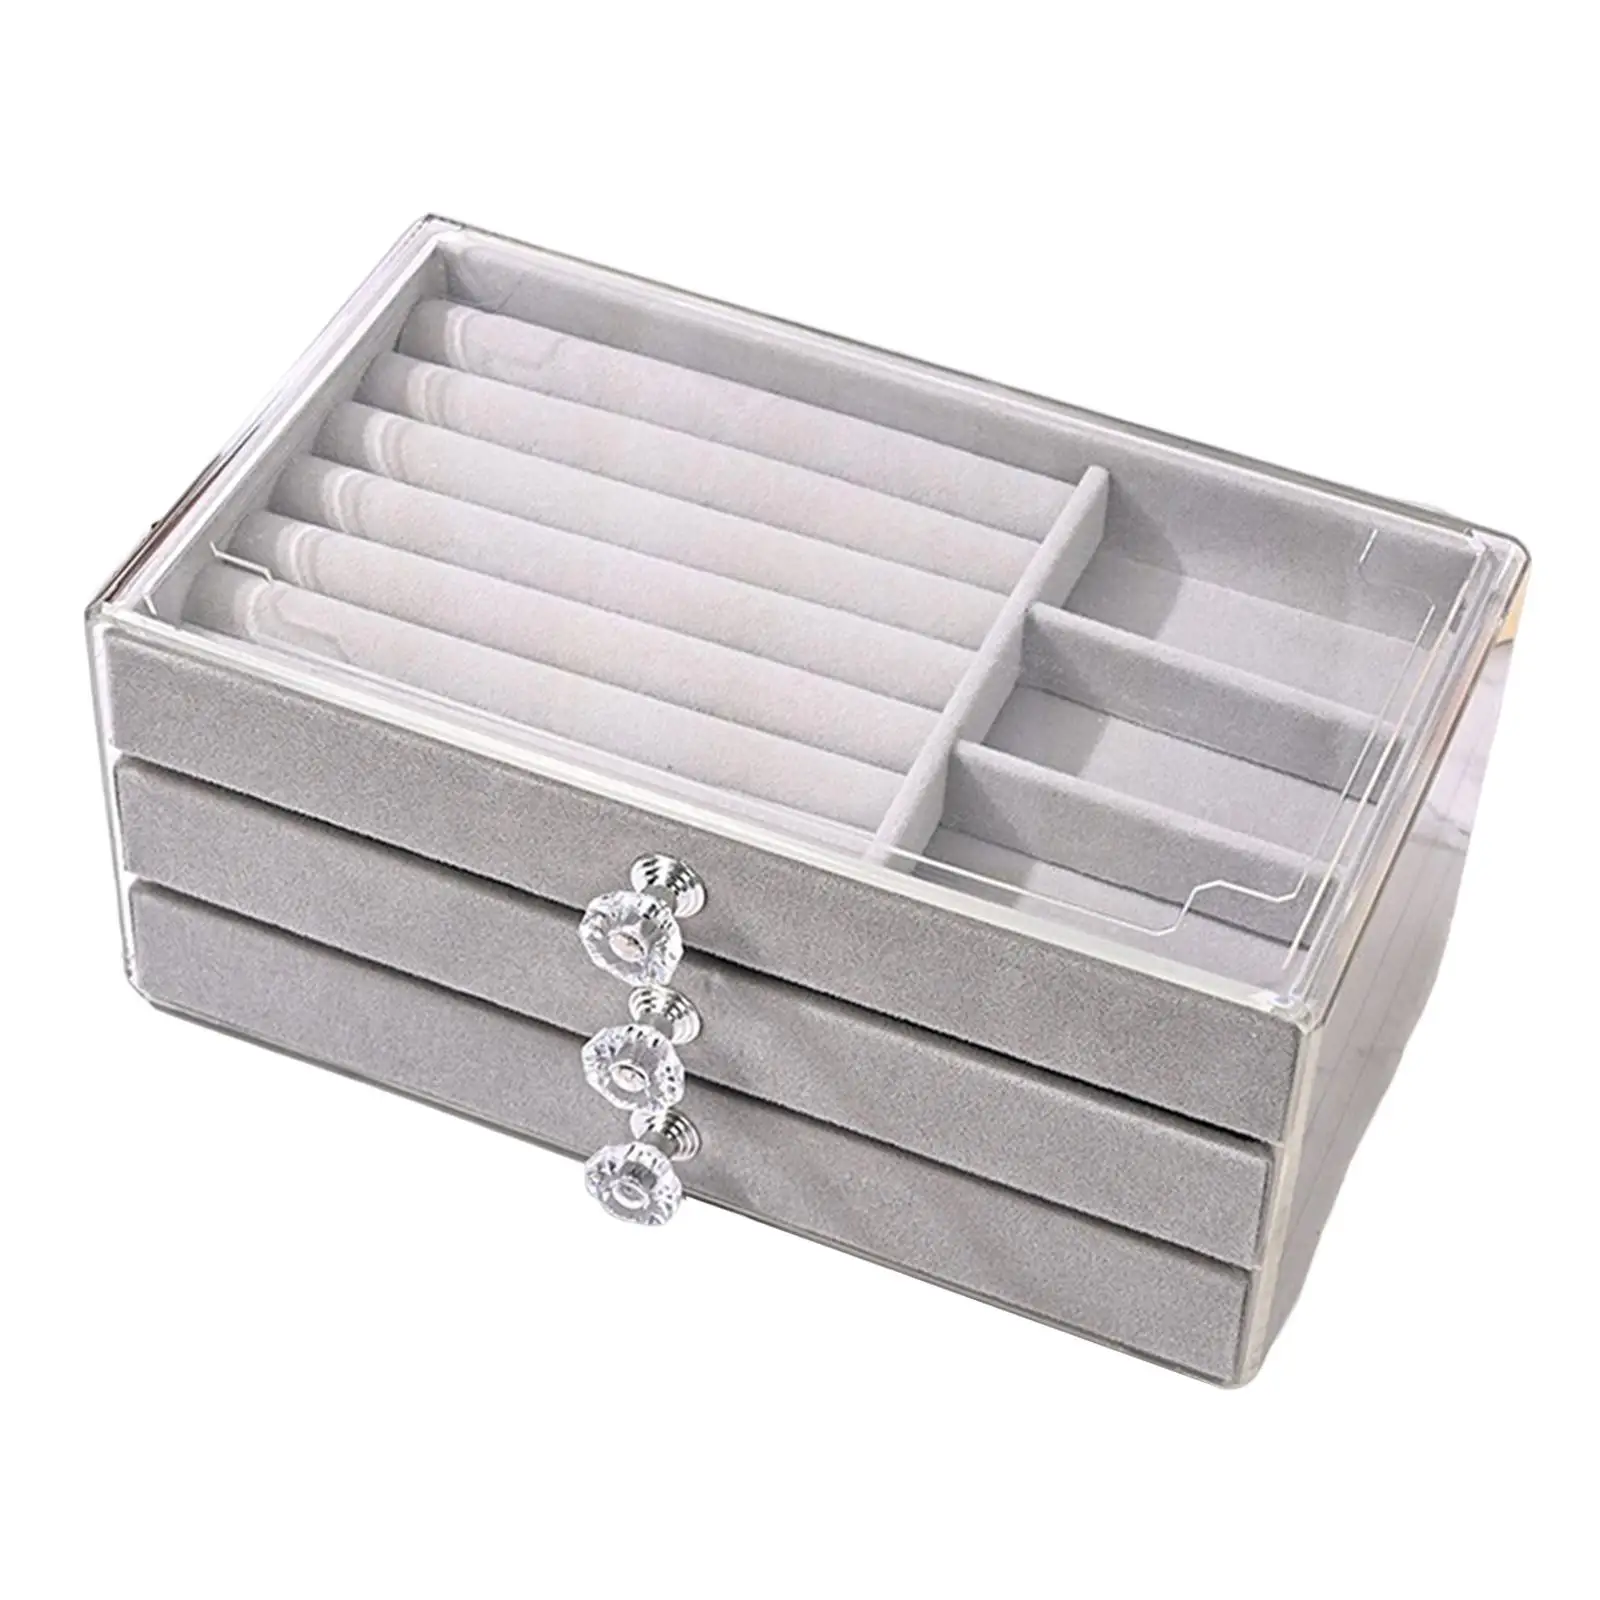 Acrylic Jewelry Organizer with 3 Drawers Velvet Jewelry Storage Holder for Necklace Bangle Bracelet Watch Brooch Multifunctional